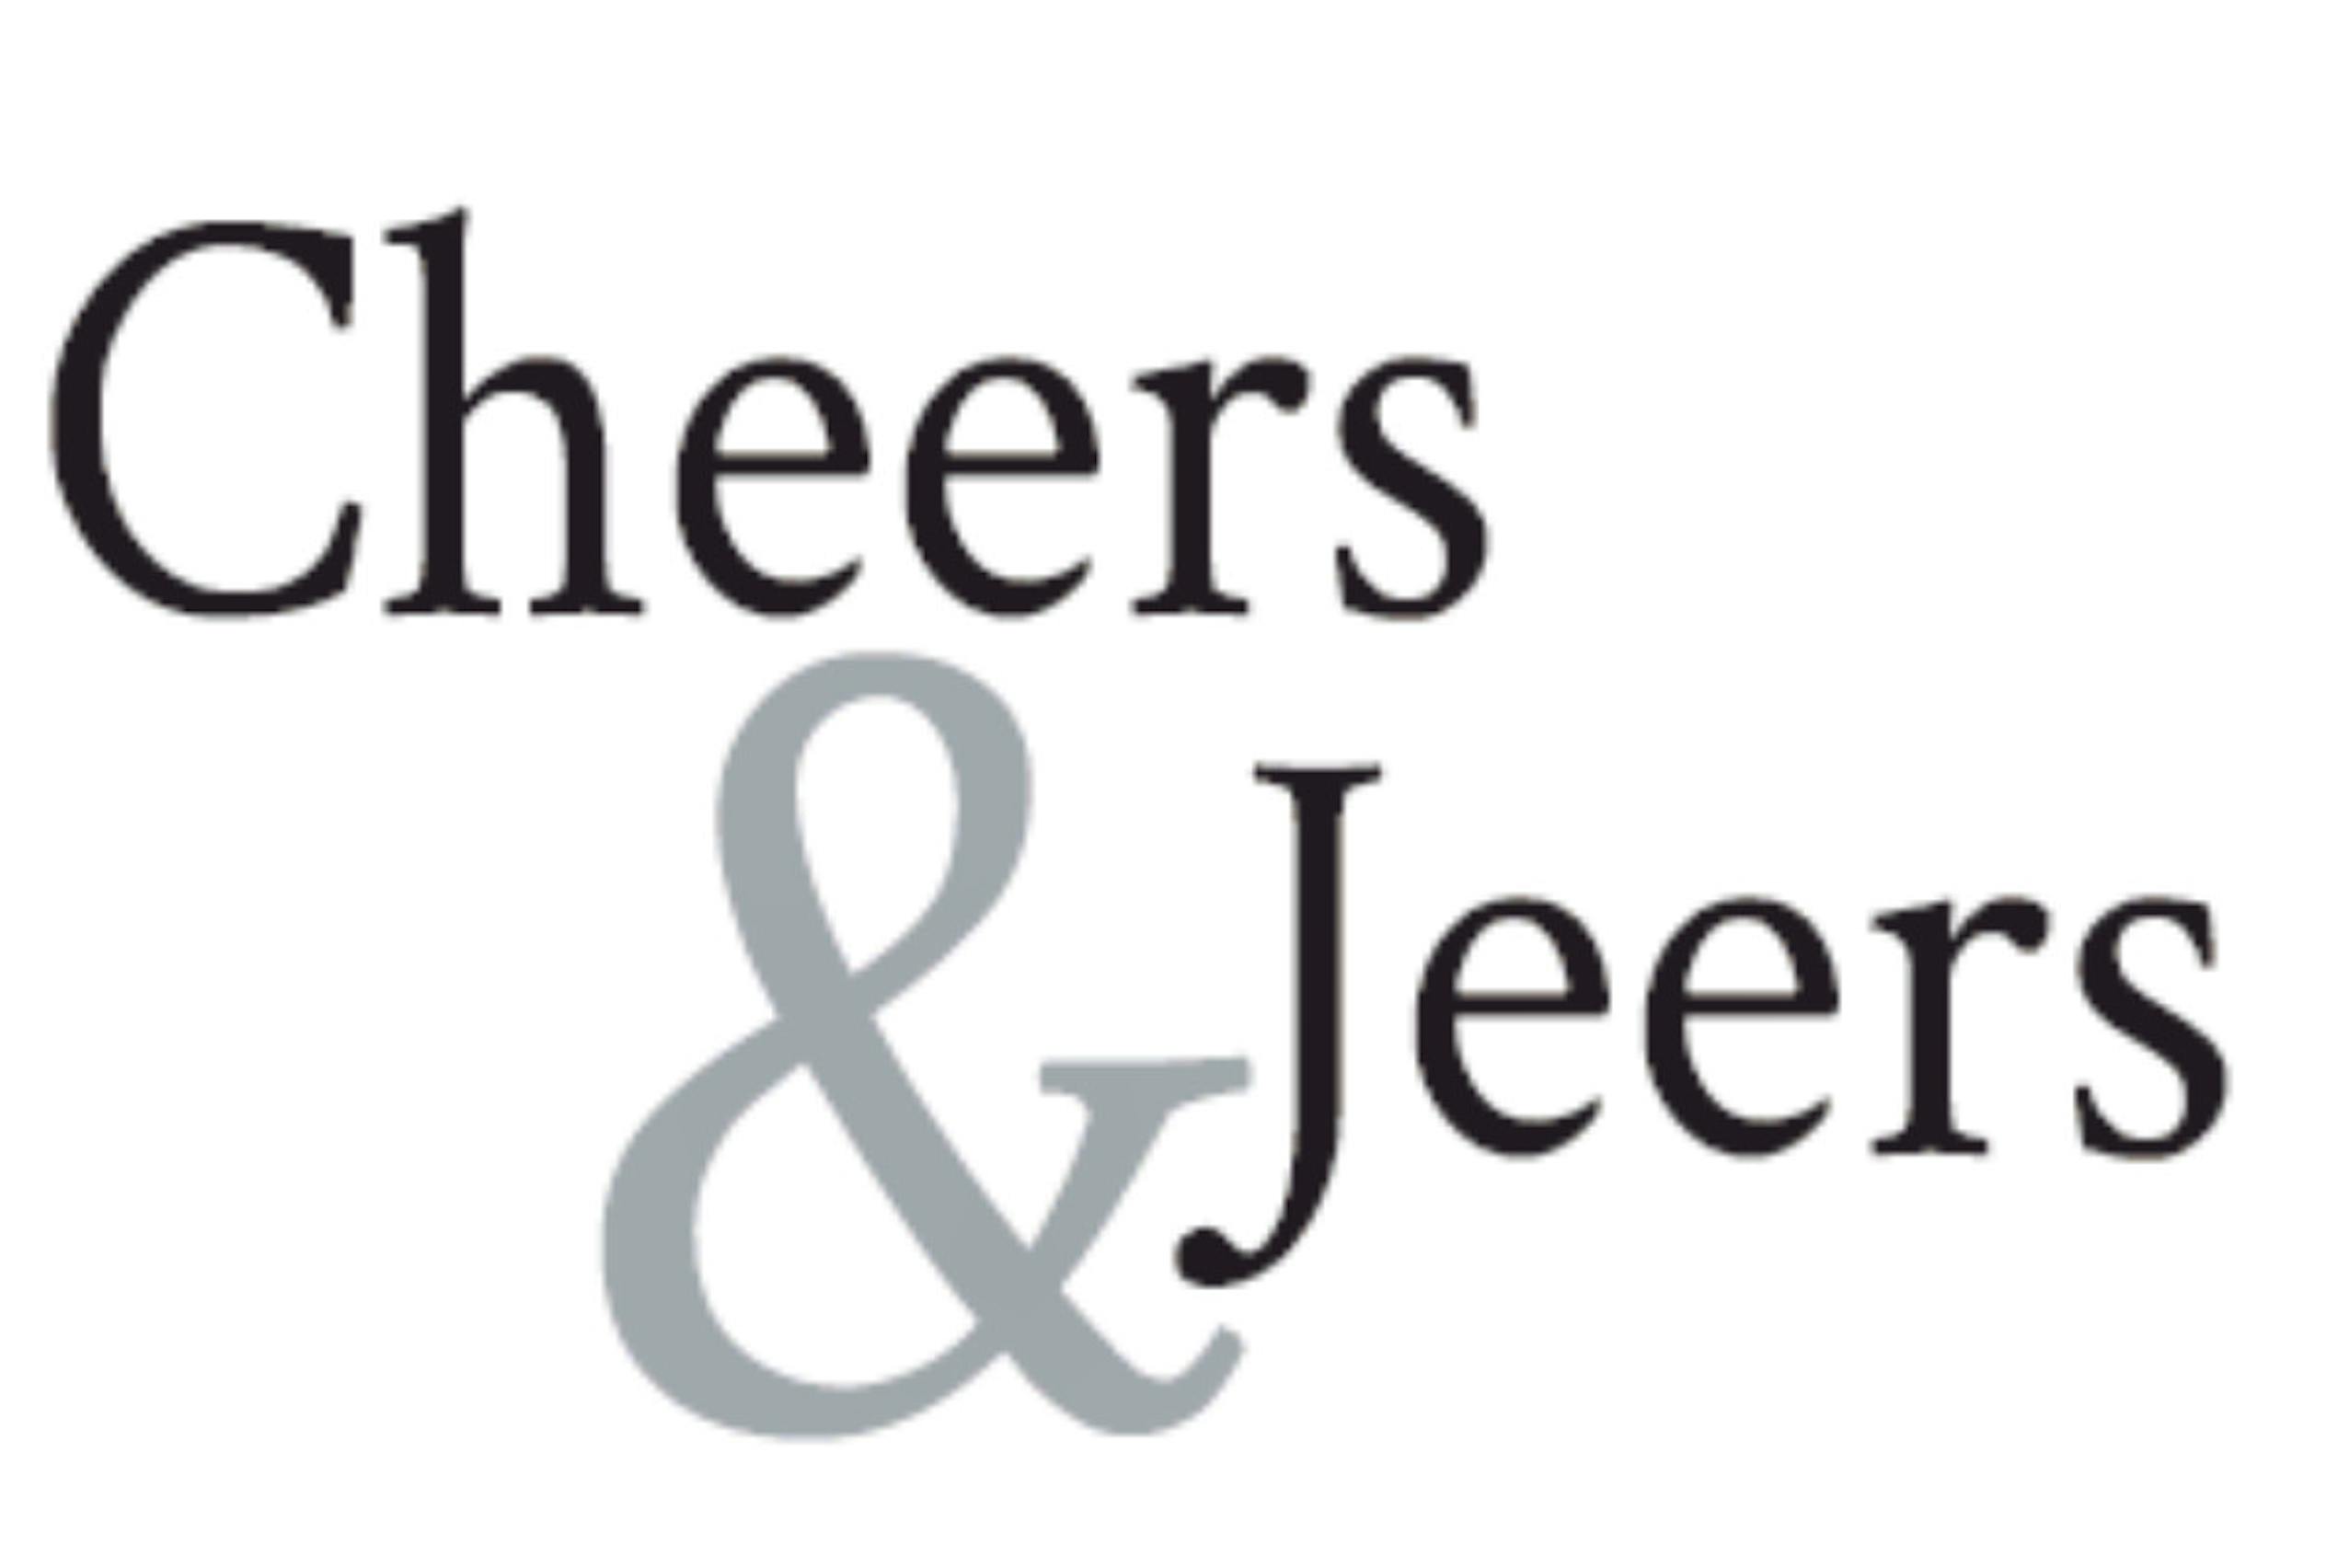 EDITORIAL: Cheers & Jeers for Feb. 